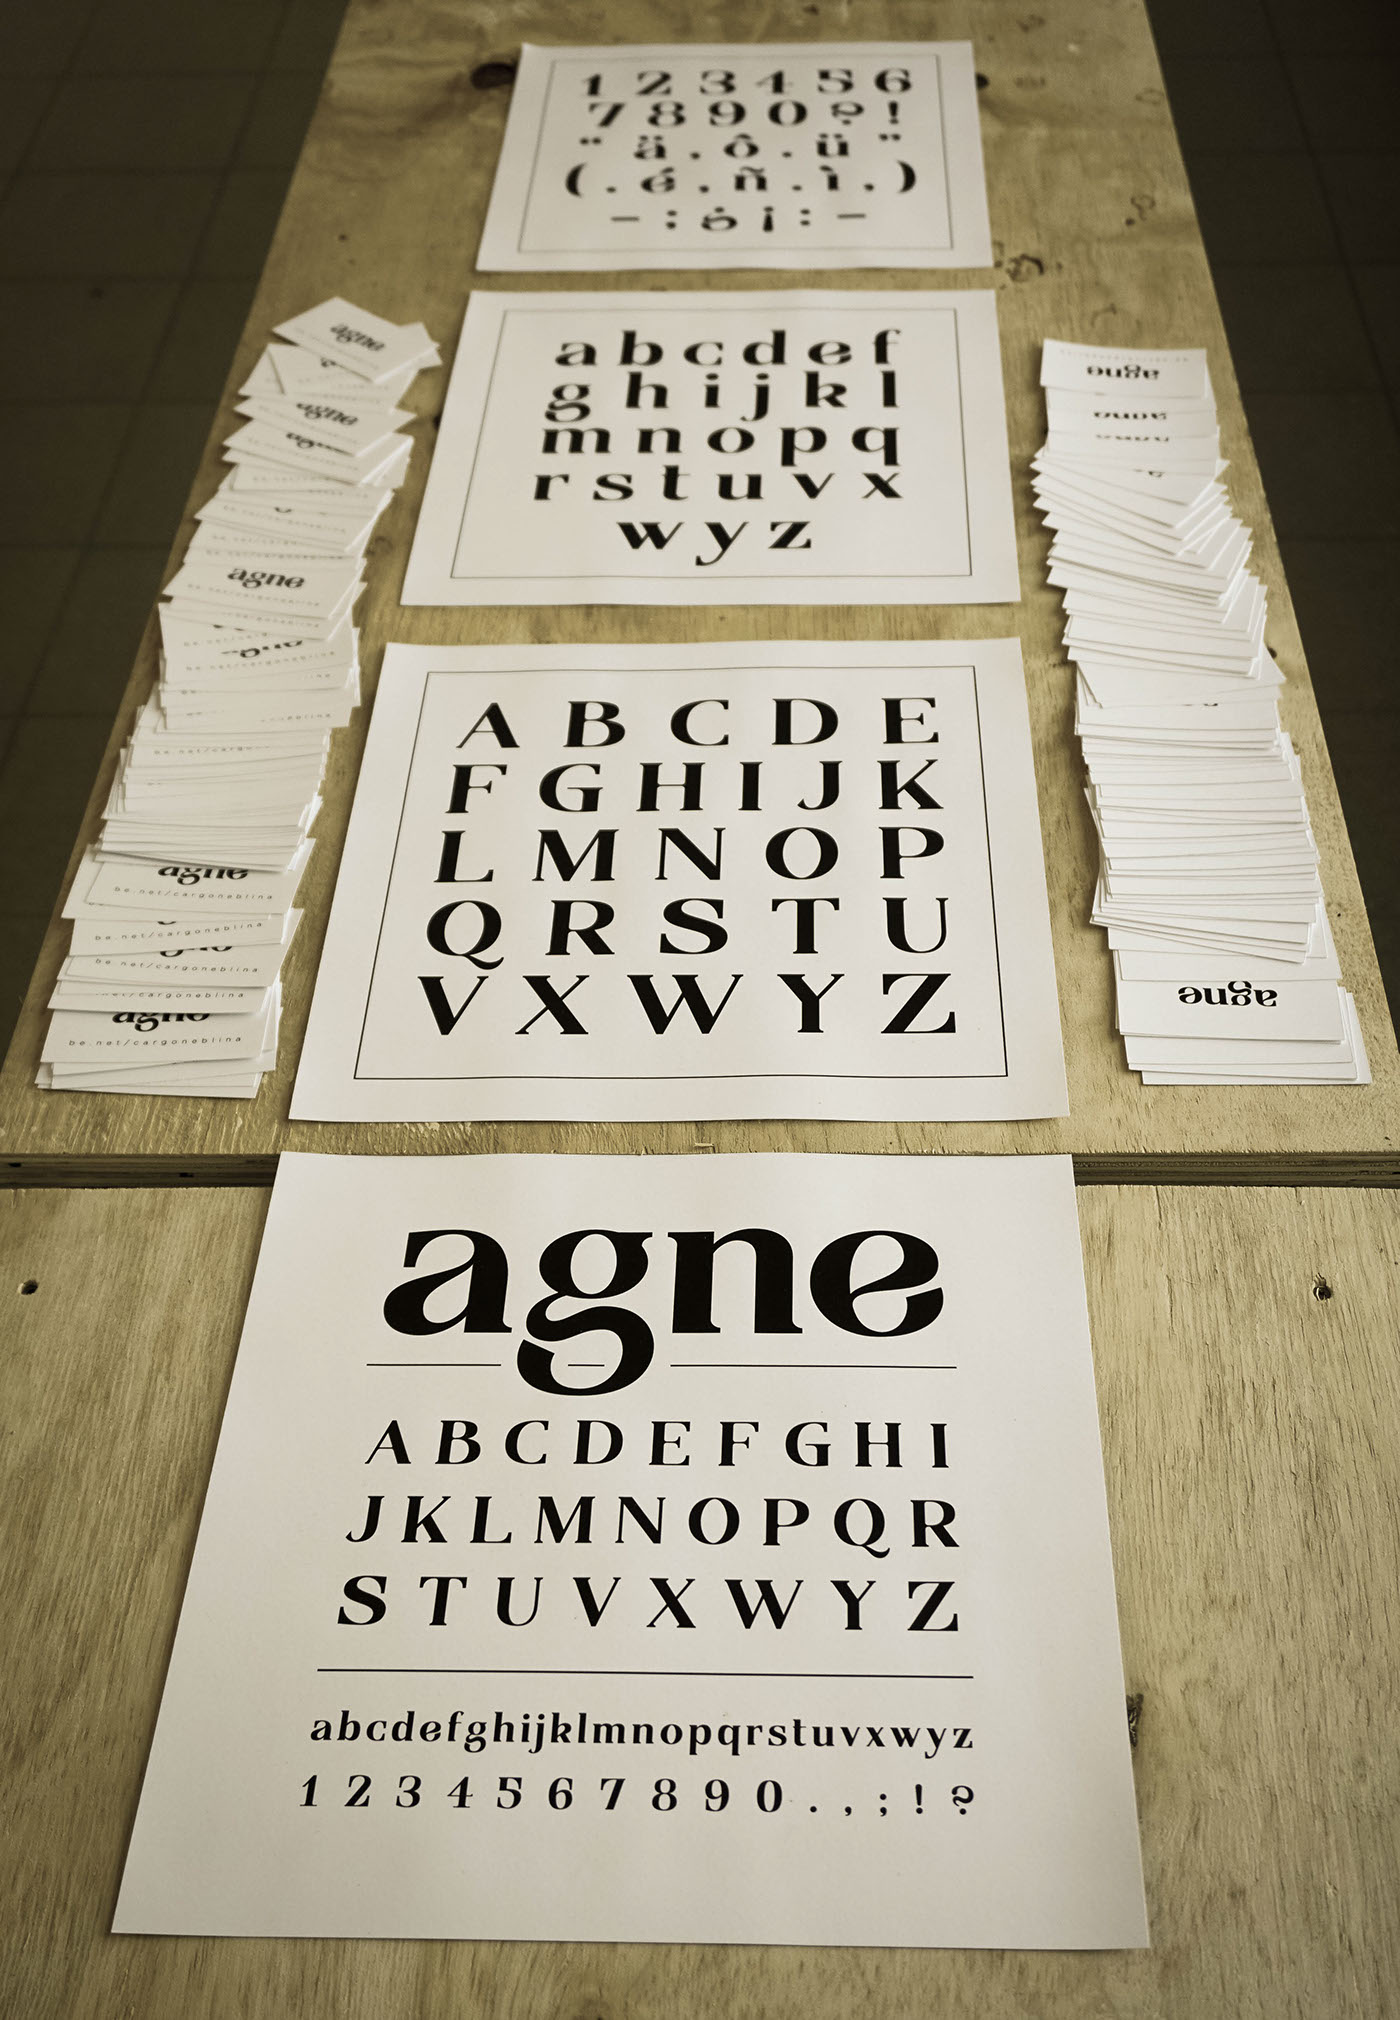 Agne font download Typeface typedesign free